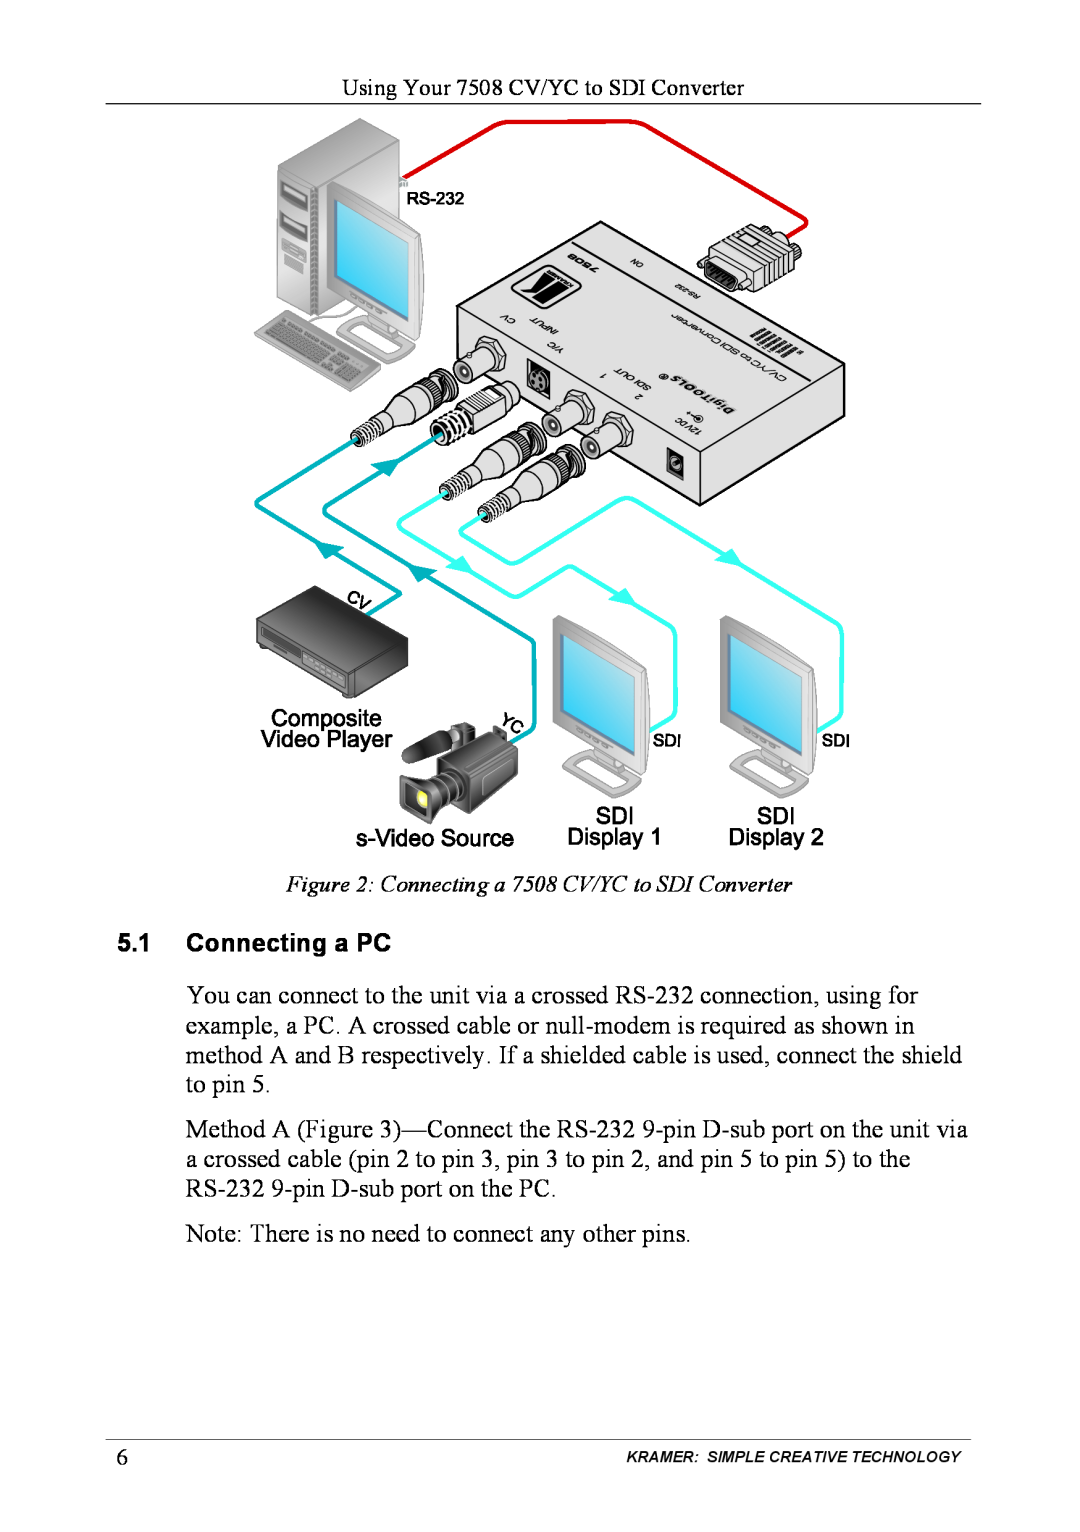 Kramer Electronics 7508 user manual 5.1Connecting a PC 